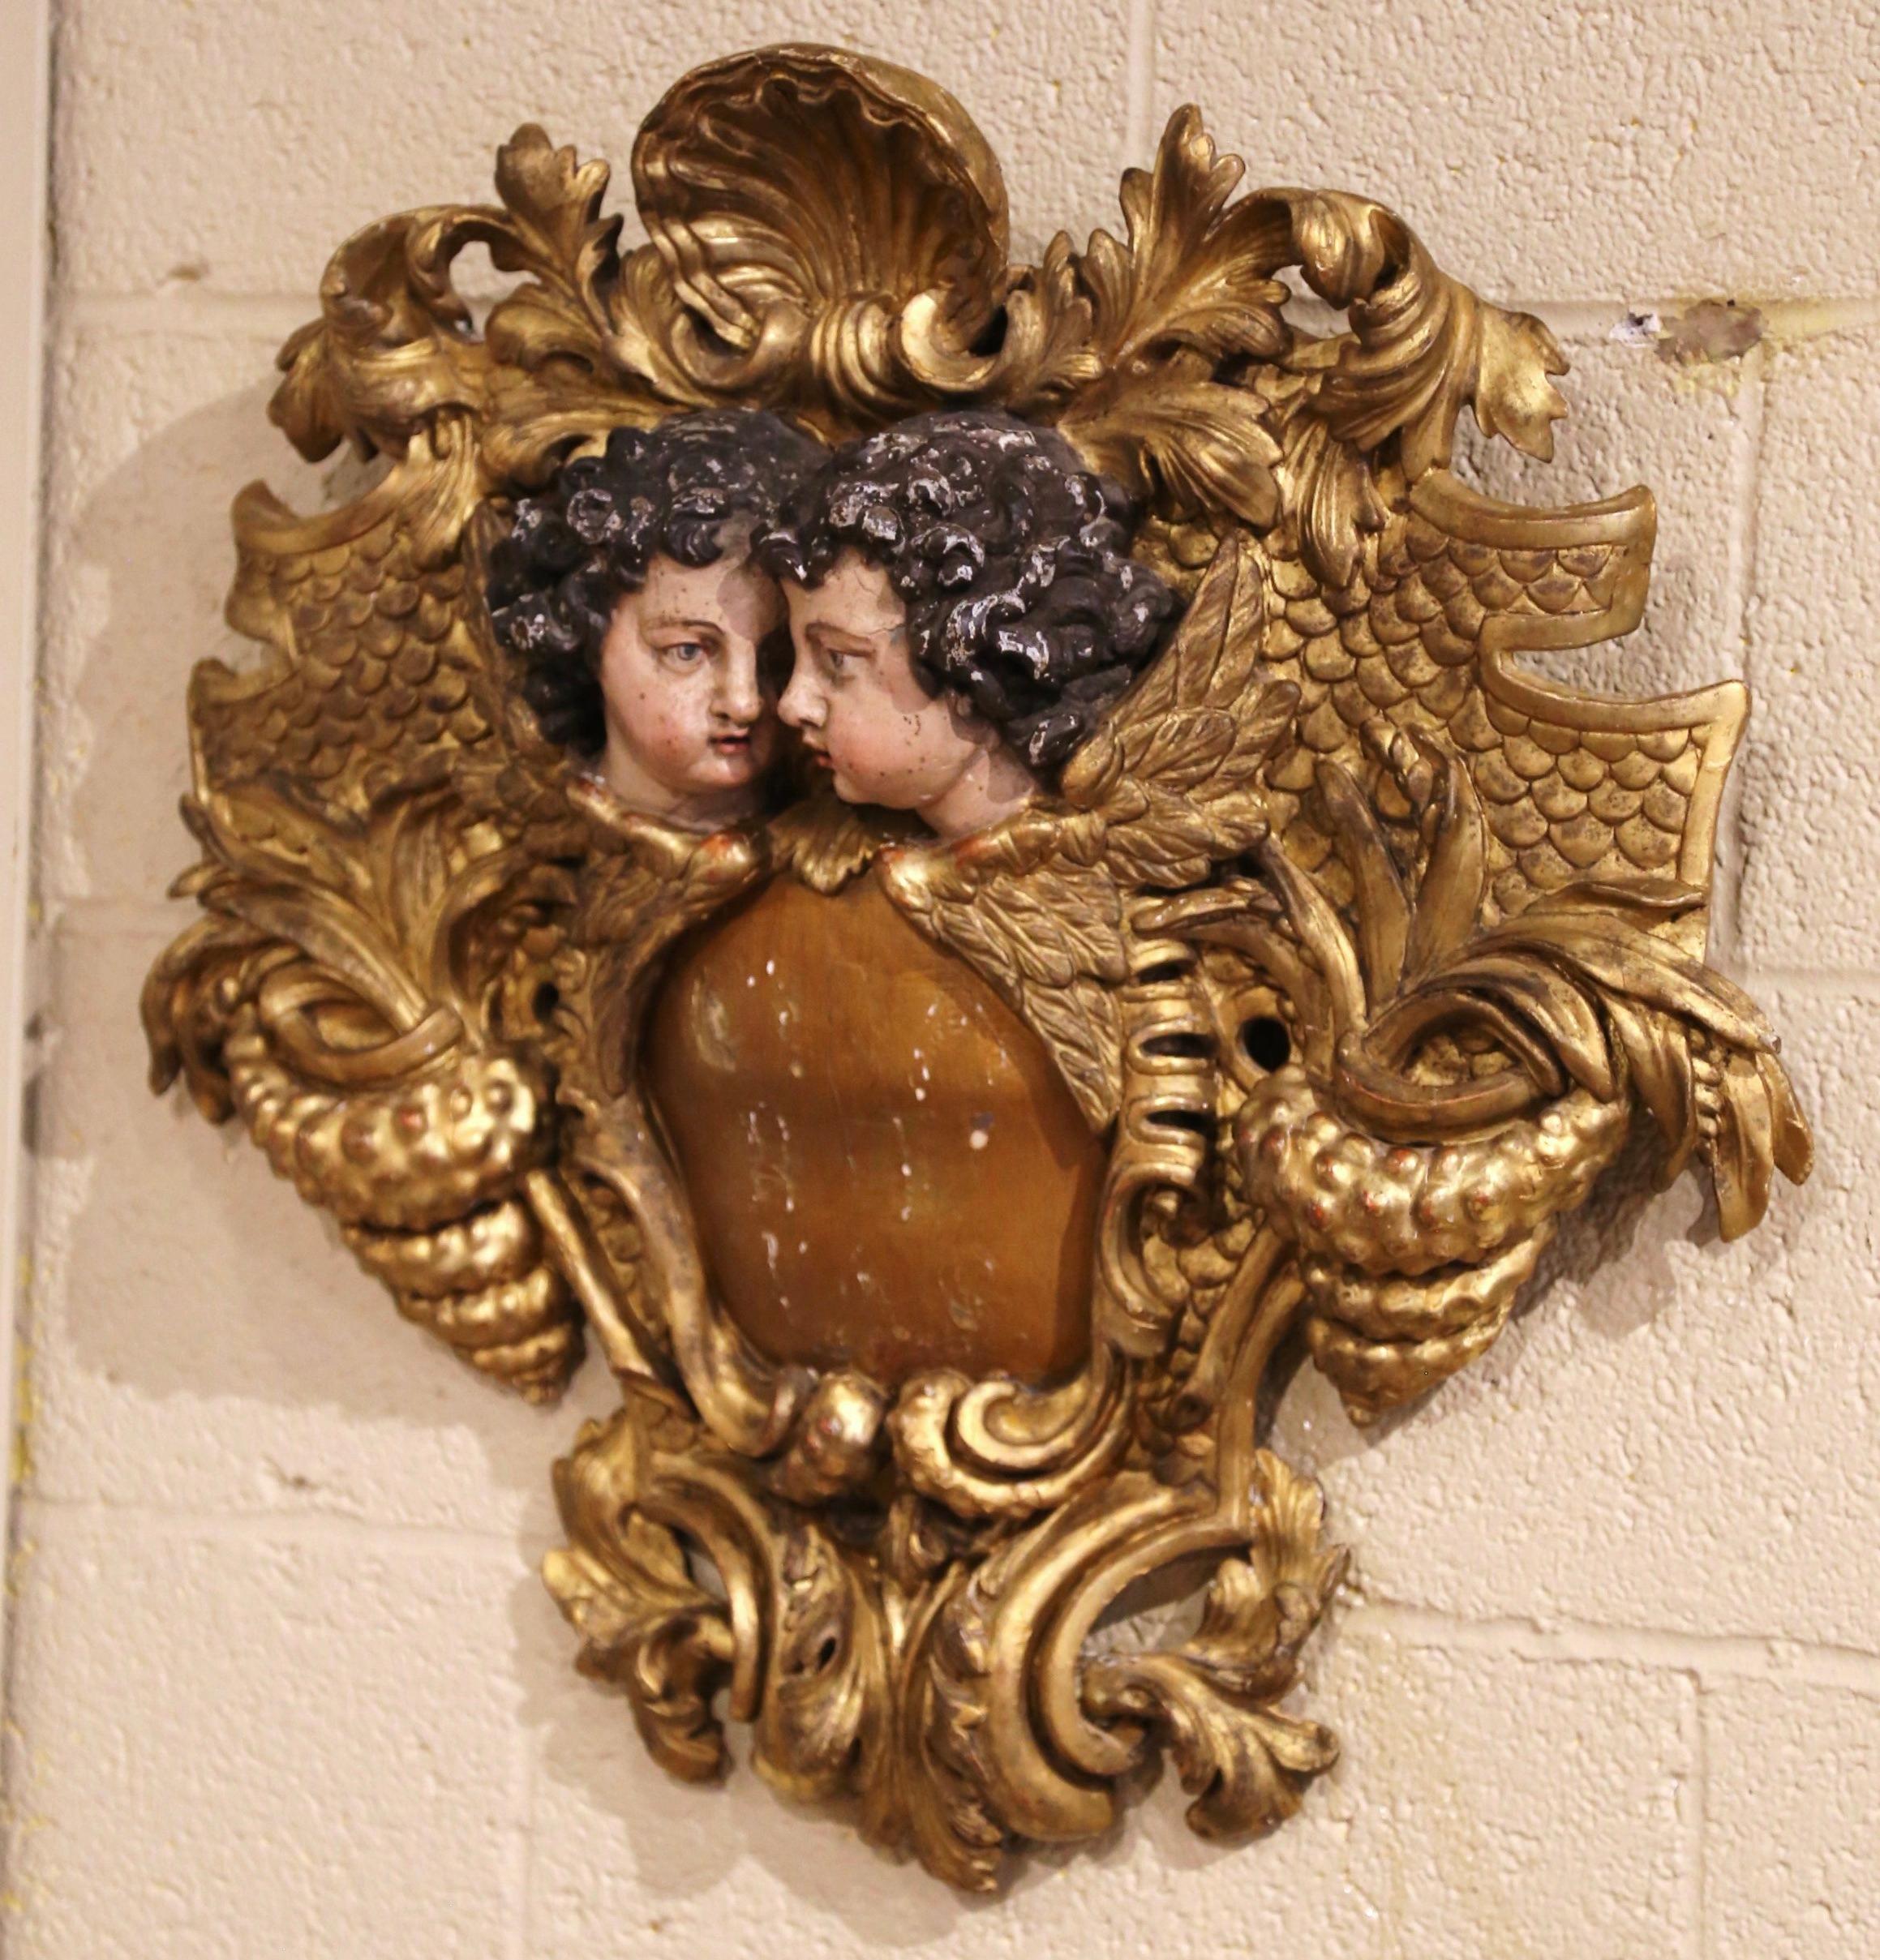 Embellish a mantel or study with this important antique wood carving crest. Crafted in Italy, circa 1760, the elegant wall-mounted plaque features carved scrolls throughout including in the center two polychromed cherubs with wings looking at each